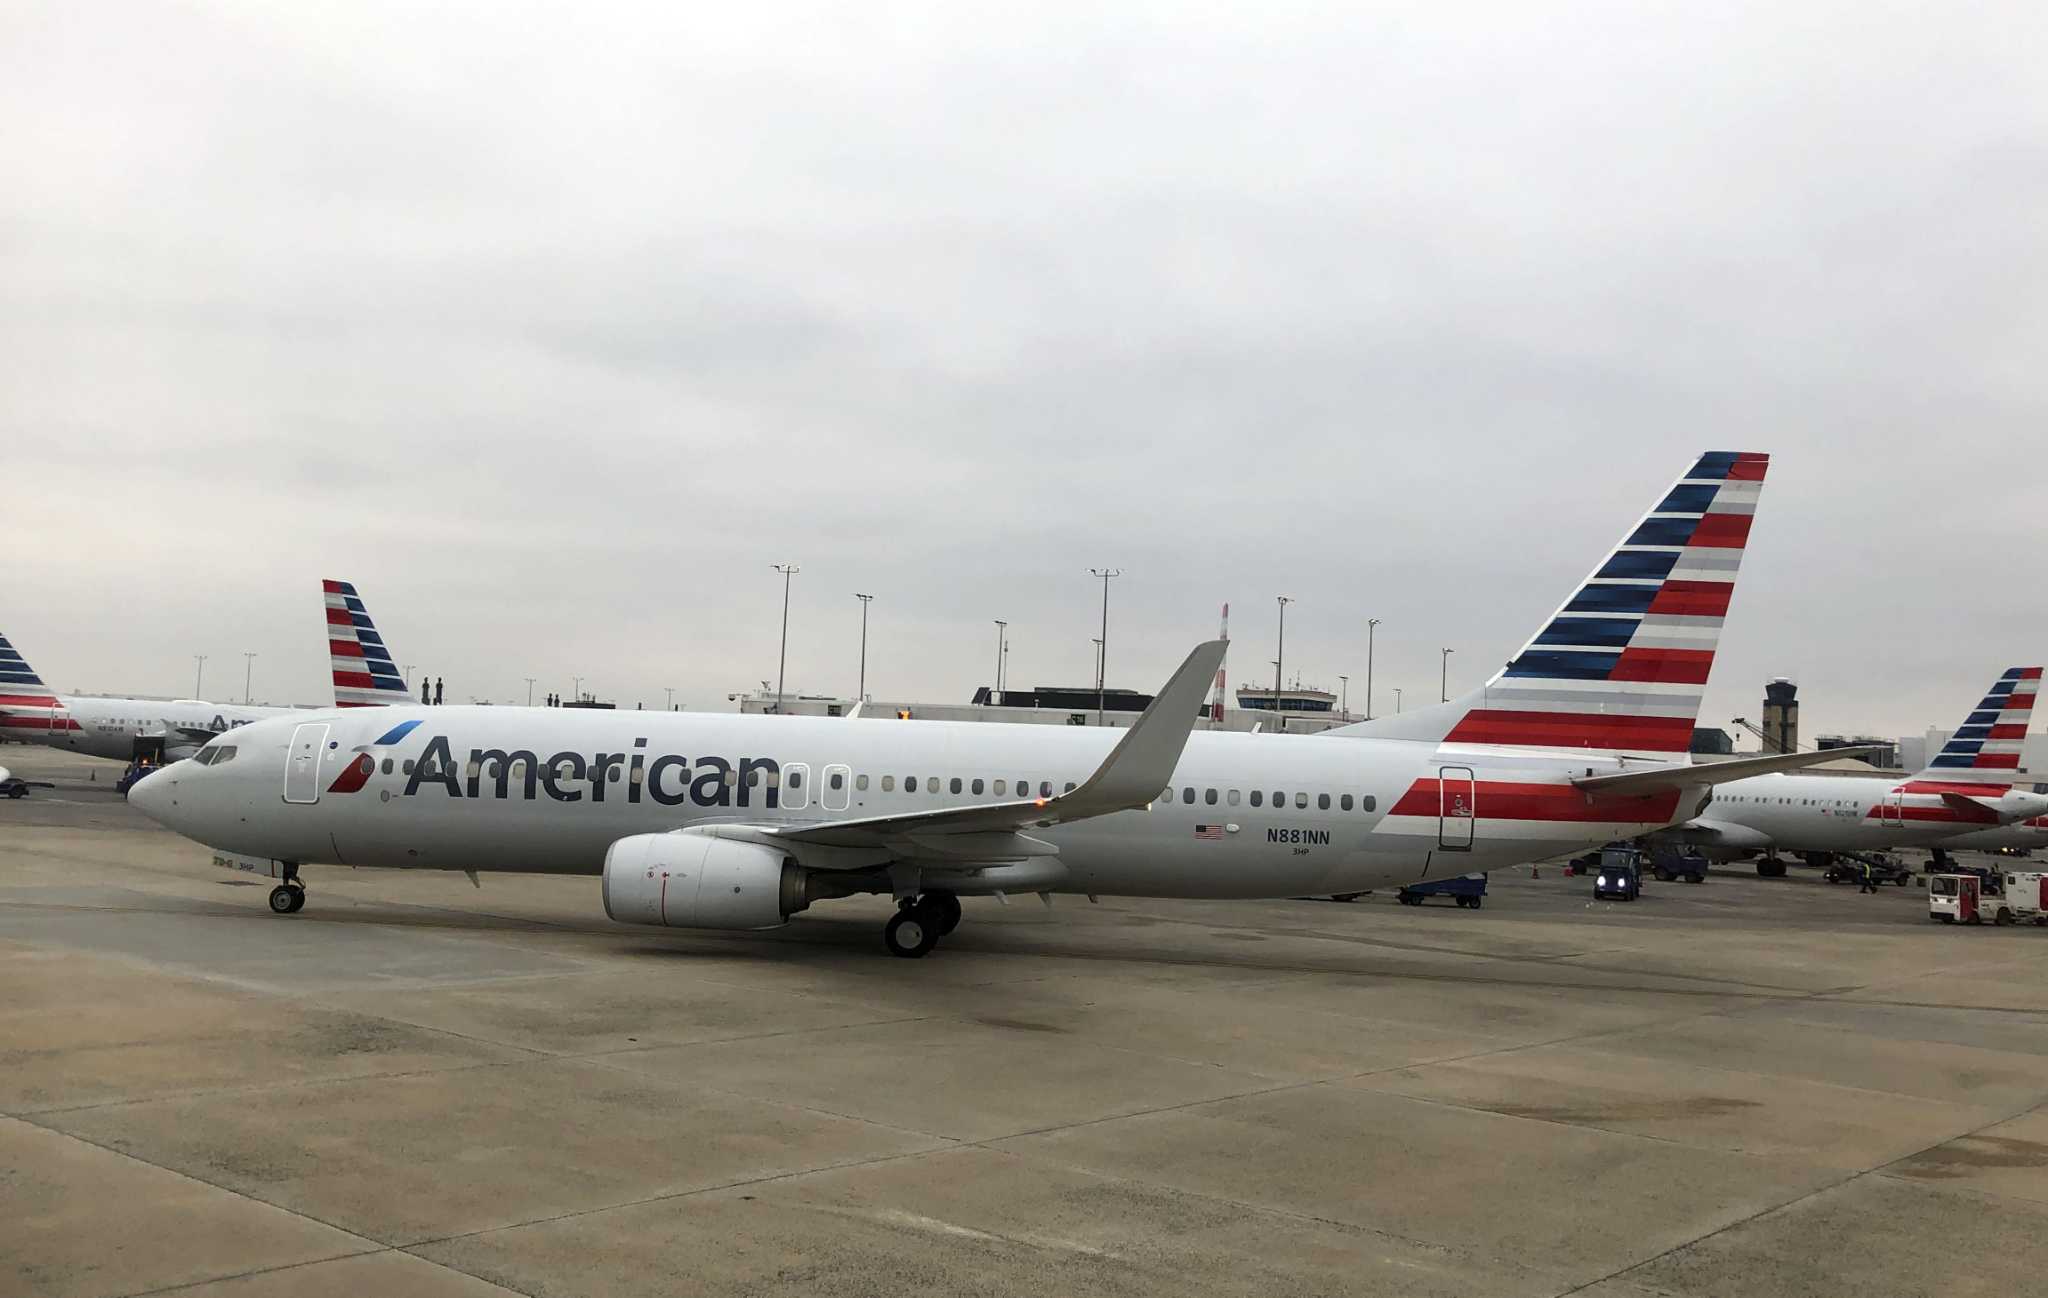 American Airlines Overhauls Its Fleet The Result Less Legroom Smaller Restrooms Expressnews Com,Valentines Day Romantic Hotel Decorations